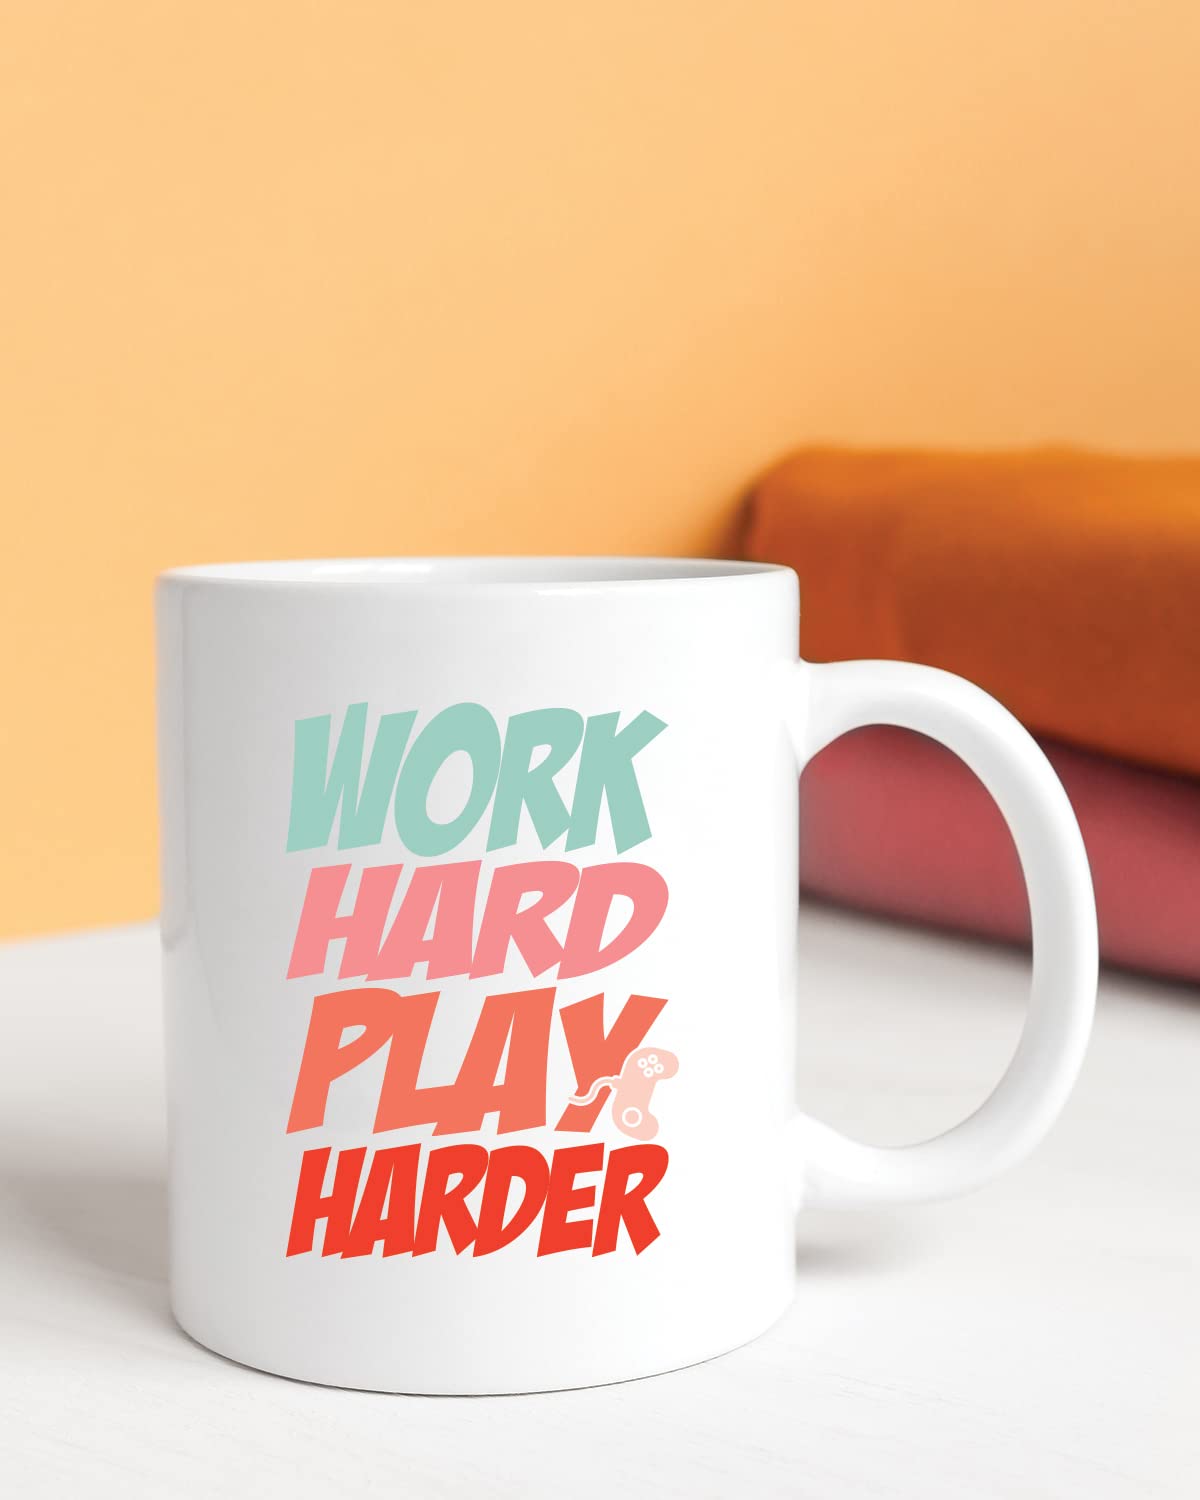 Work Hard, Play Harder Coffee Mug - Unique Gifts for Game Lovers, Gamer Mugs, Gifts for Gaming Fans for Husband Boyfriend Birthday, Valentine's Day Gift, Birthday Gift for Gamer Nerds